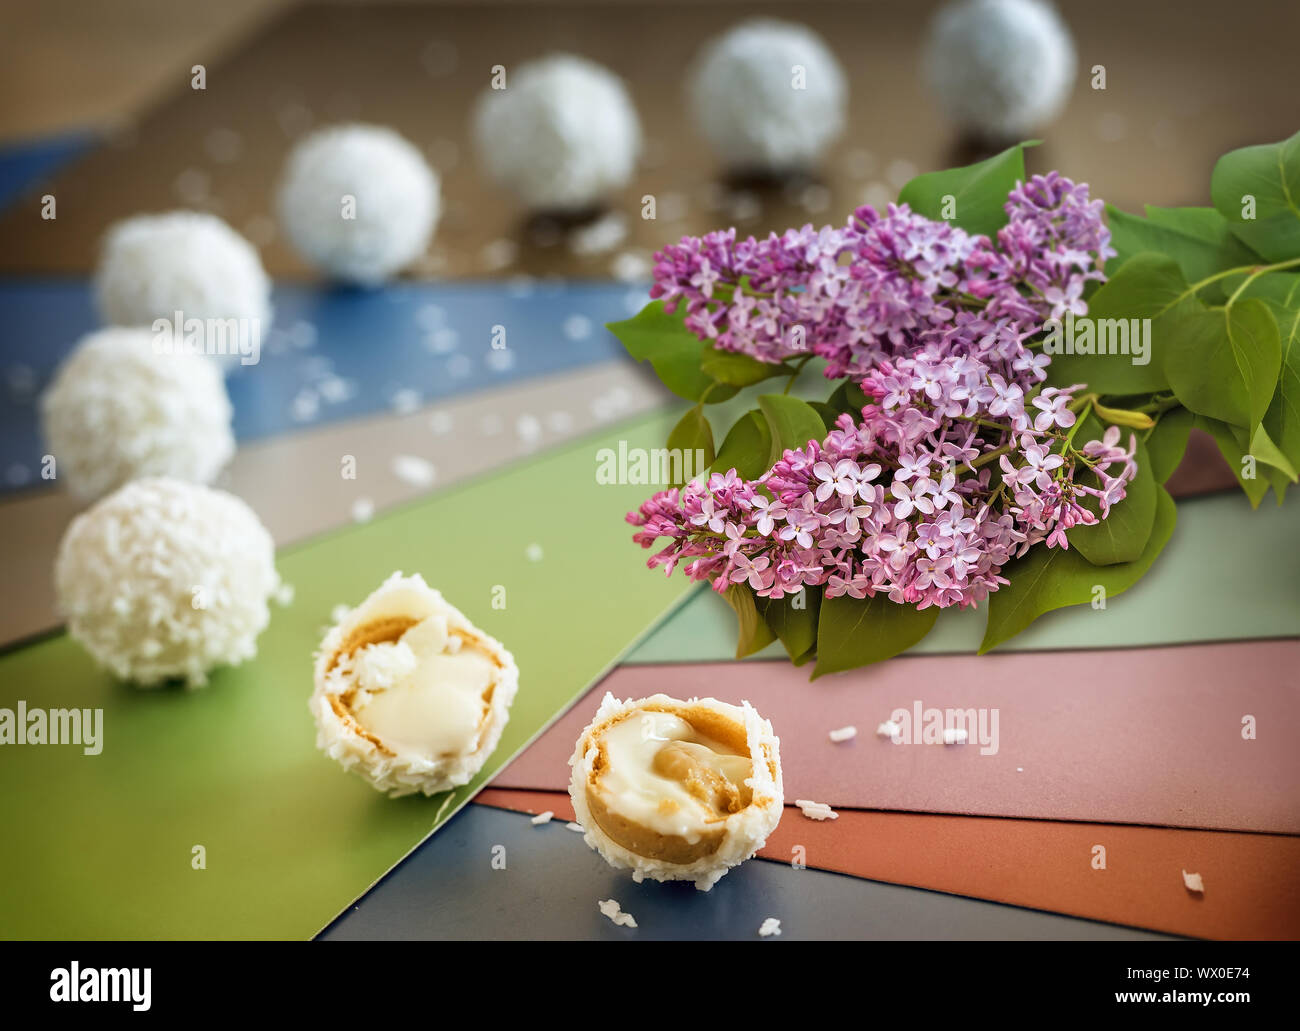 Still life: delicious cookies and a branch of flowering lilac. Stock Photo